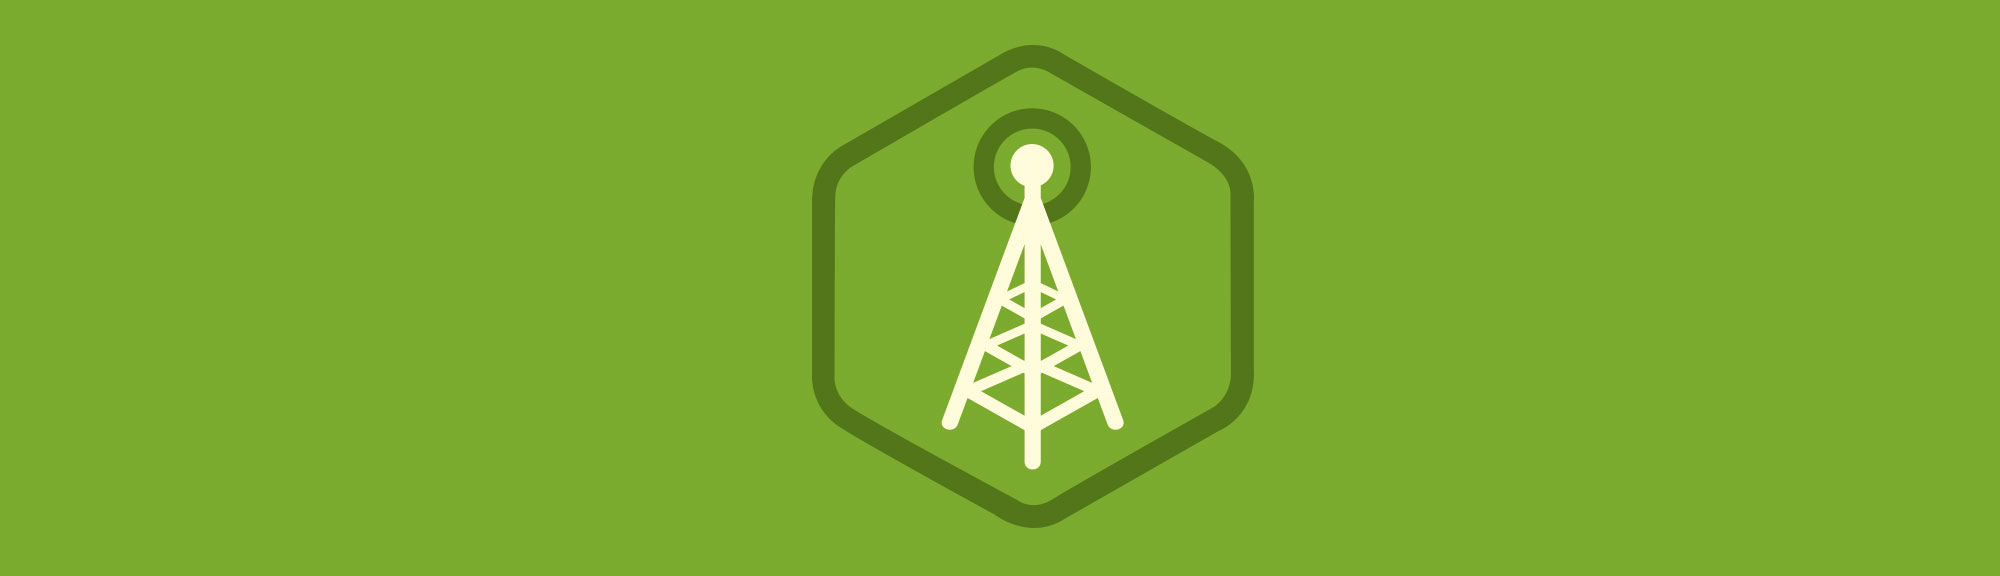 Treehouse svg #1, Download drawings